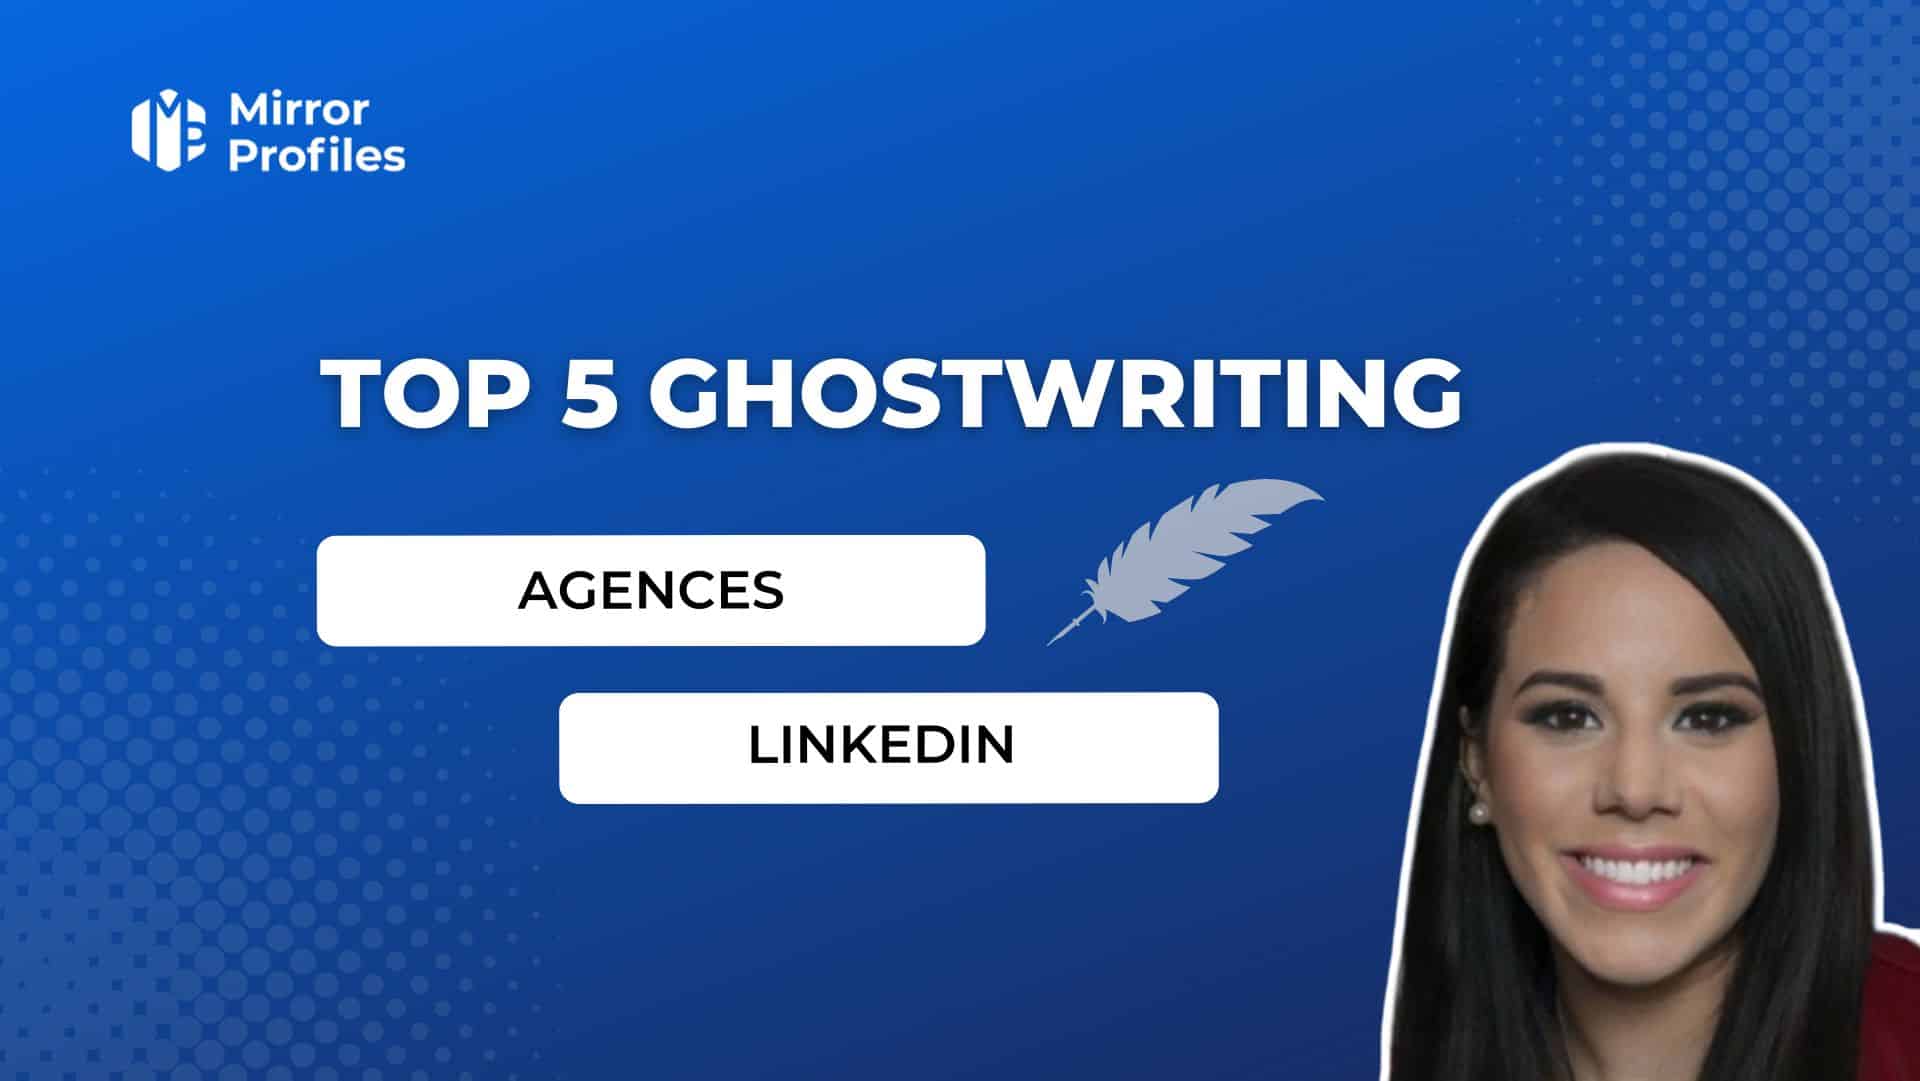 A blue graphic featuring "Top 5 Best Ghostwriting" and two white buttons labeled "Agencies" and "LinkedIn." A feather icon is in the middle. A photo of a woman smiling is on the lower right corner. Mirror Profiles logo in the top left.